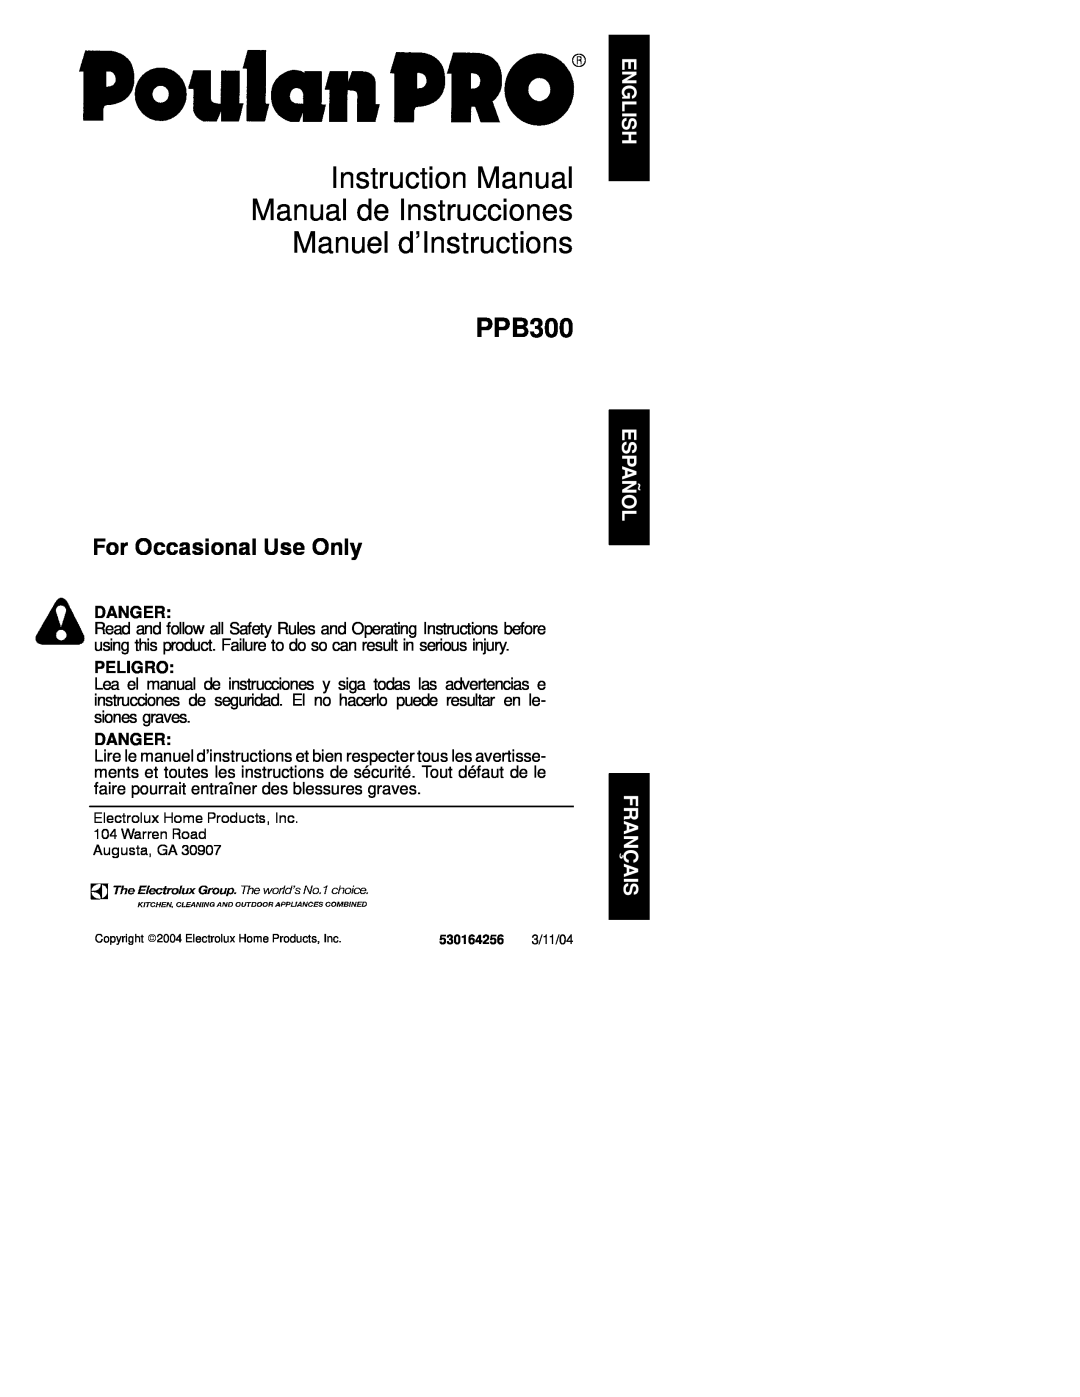 Poulan PPB300 instruction manual Danger, Peligro, Manuel d’Instructions, For Occasional Use Only 